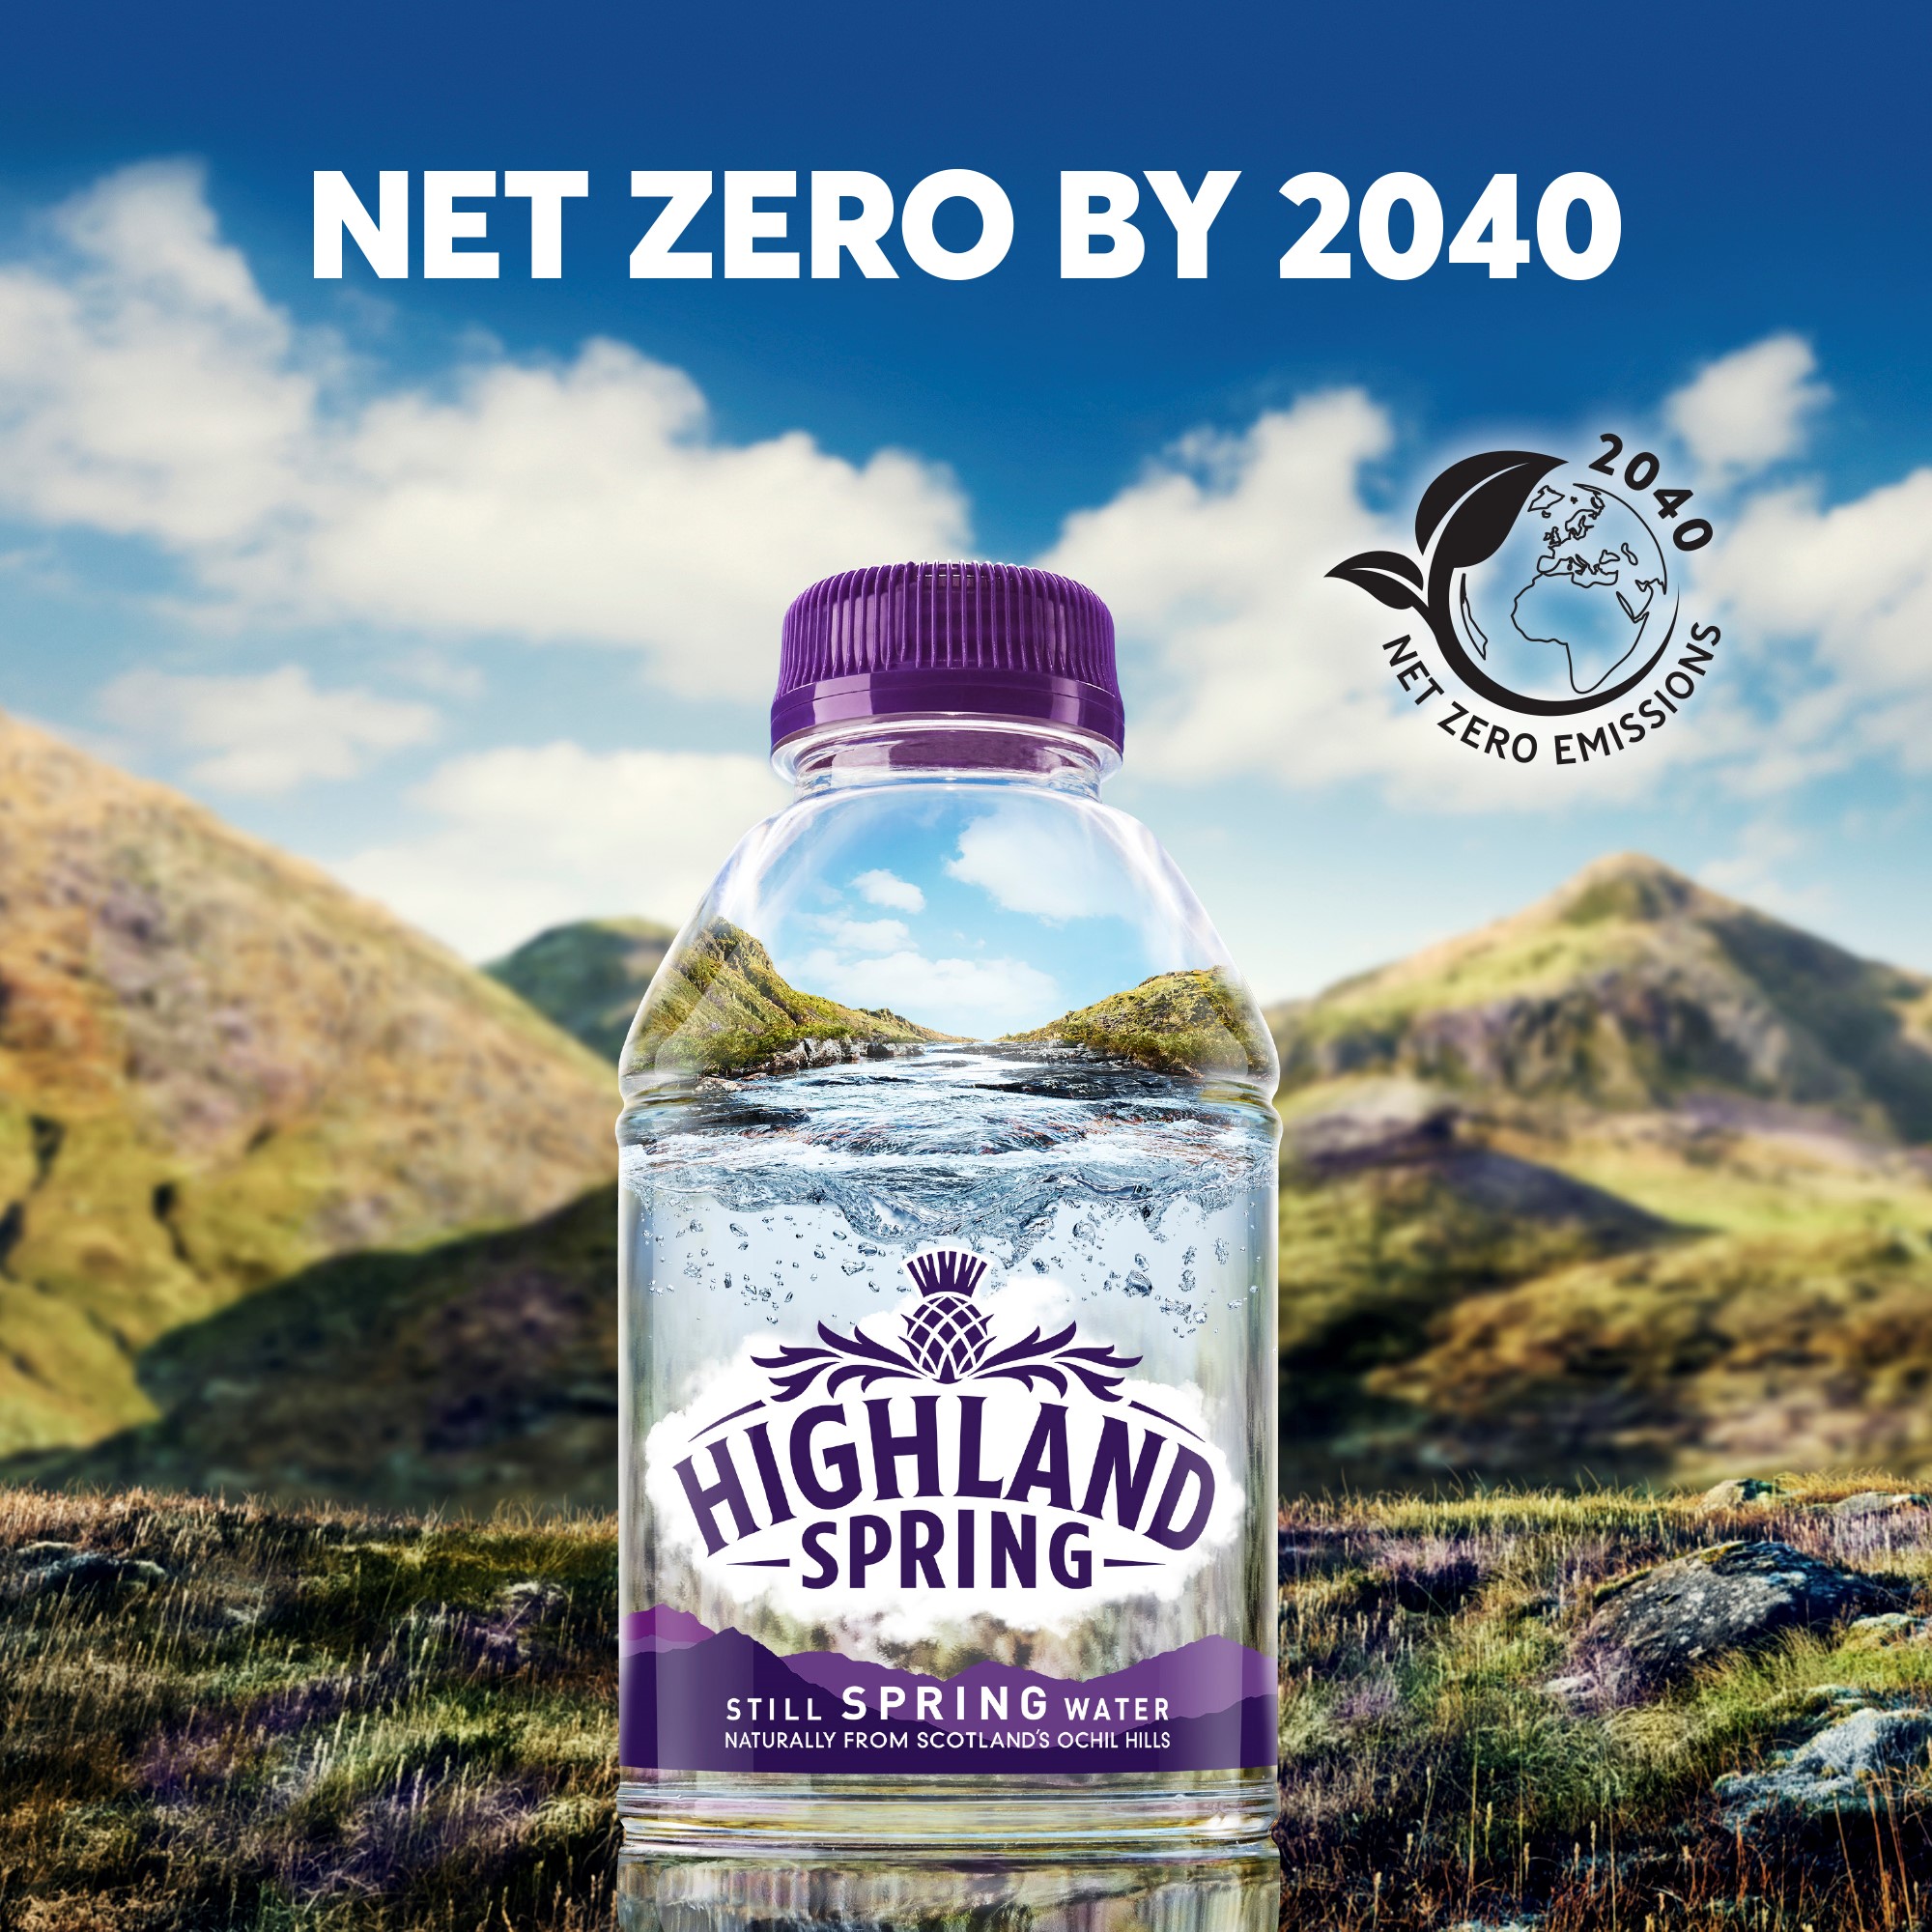 Highland Spring Group Net-Zero target approved by SBTi